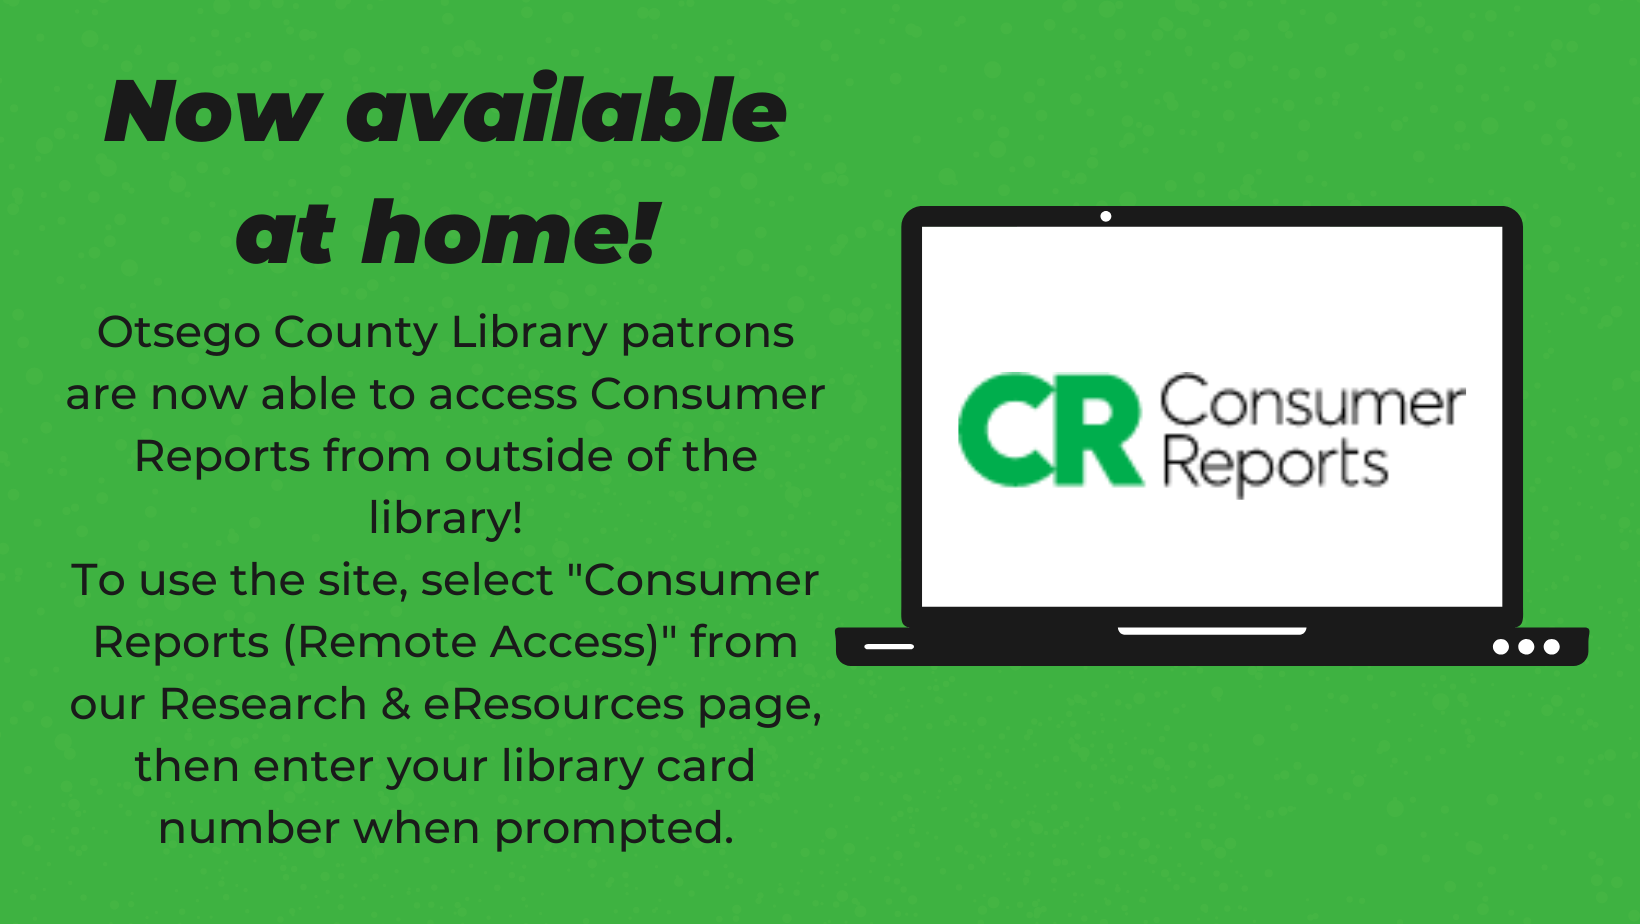 Consumers Reports is now availble from home!